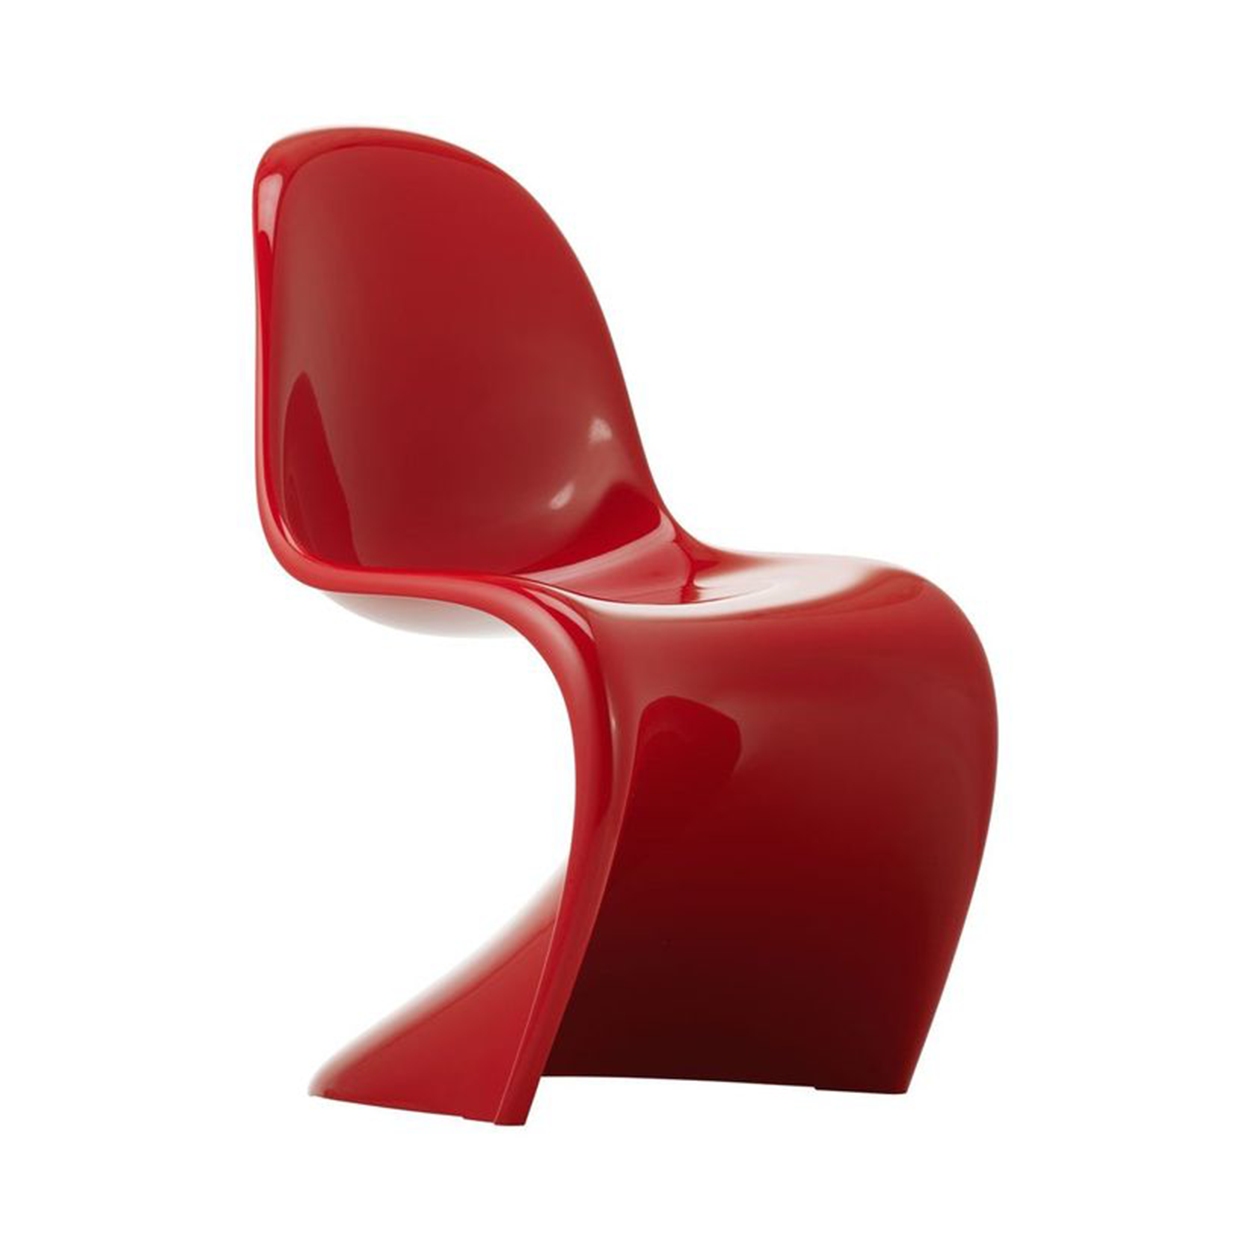 Vitra Panton Chair Classic in Red